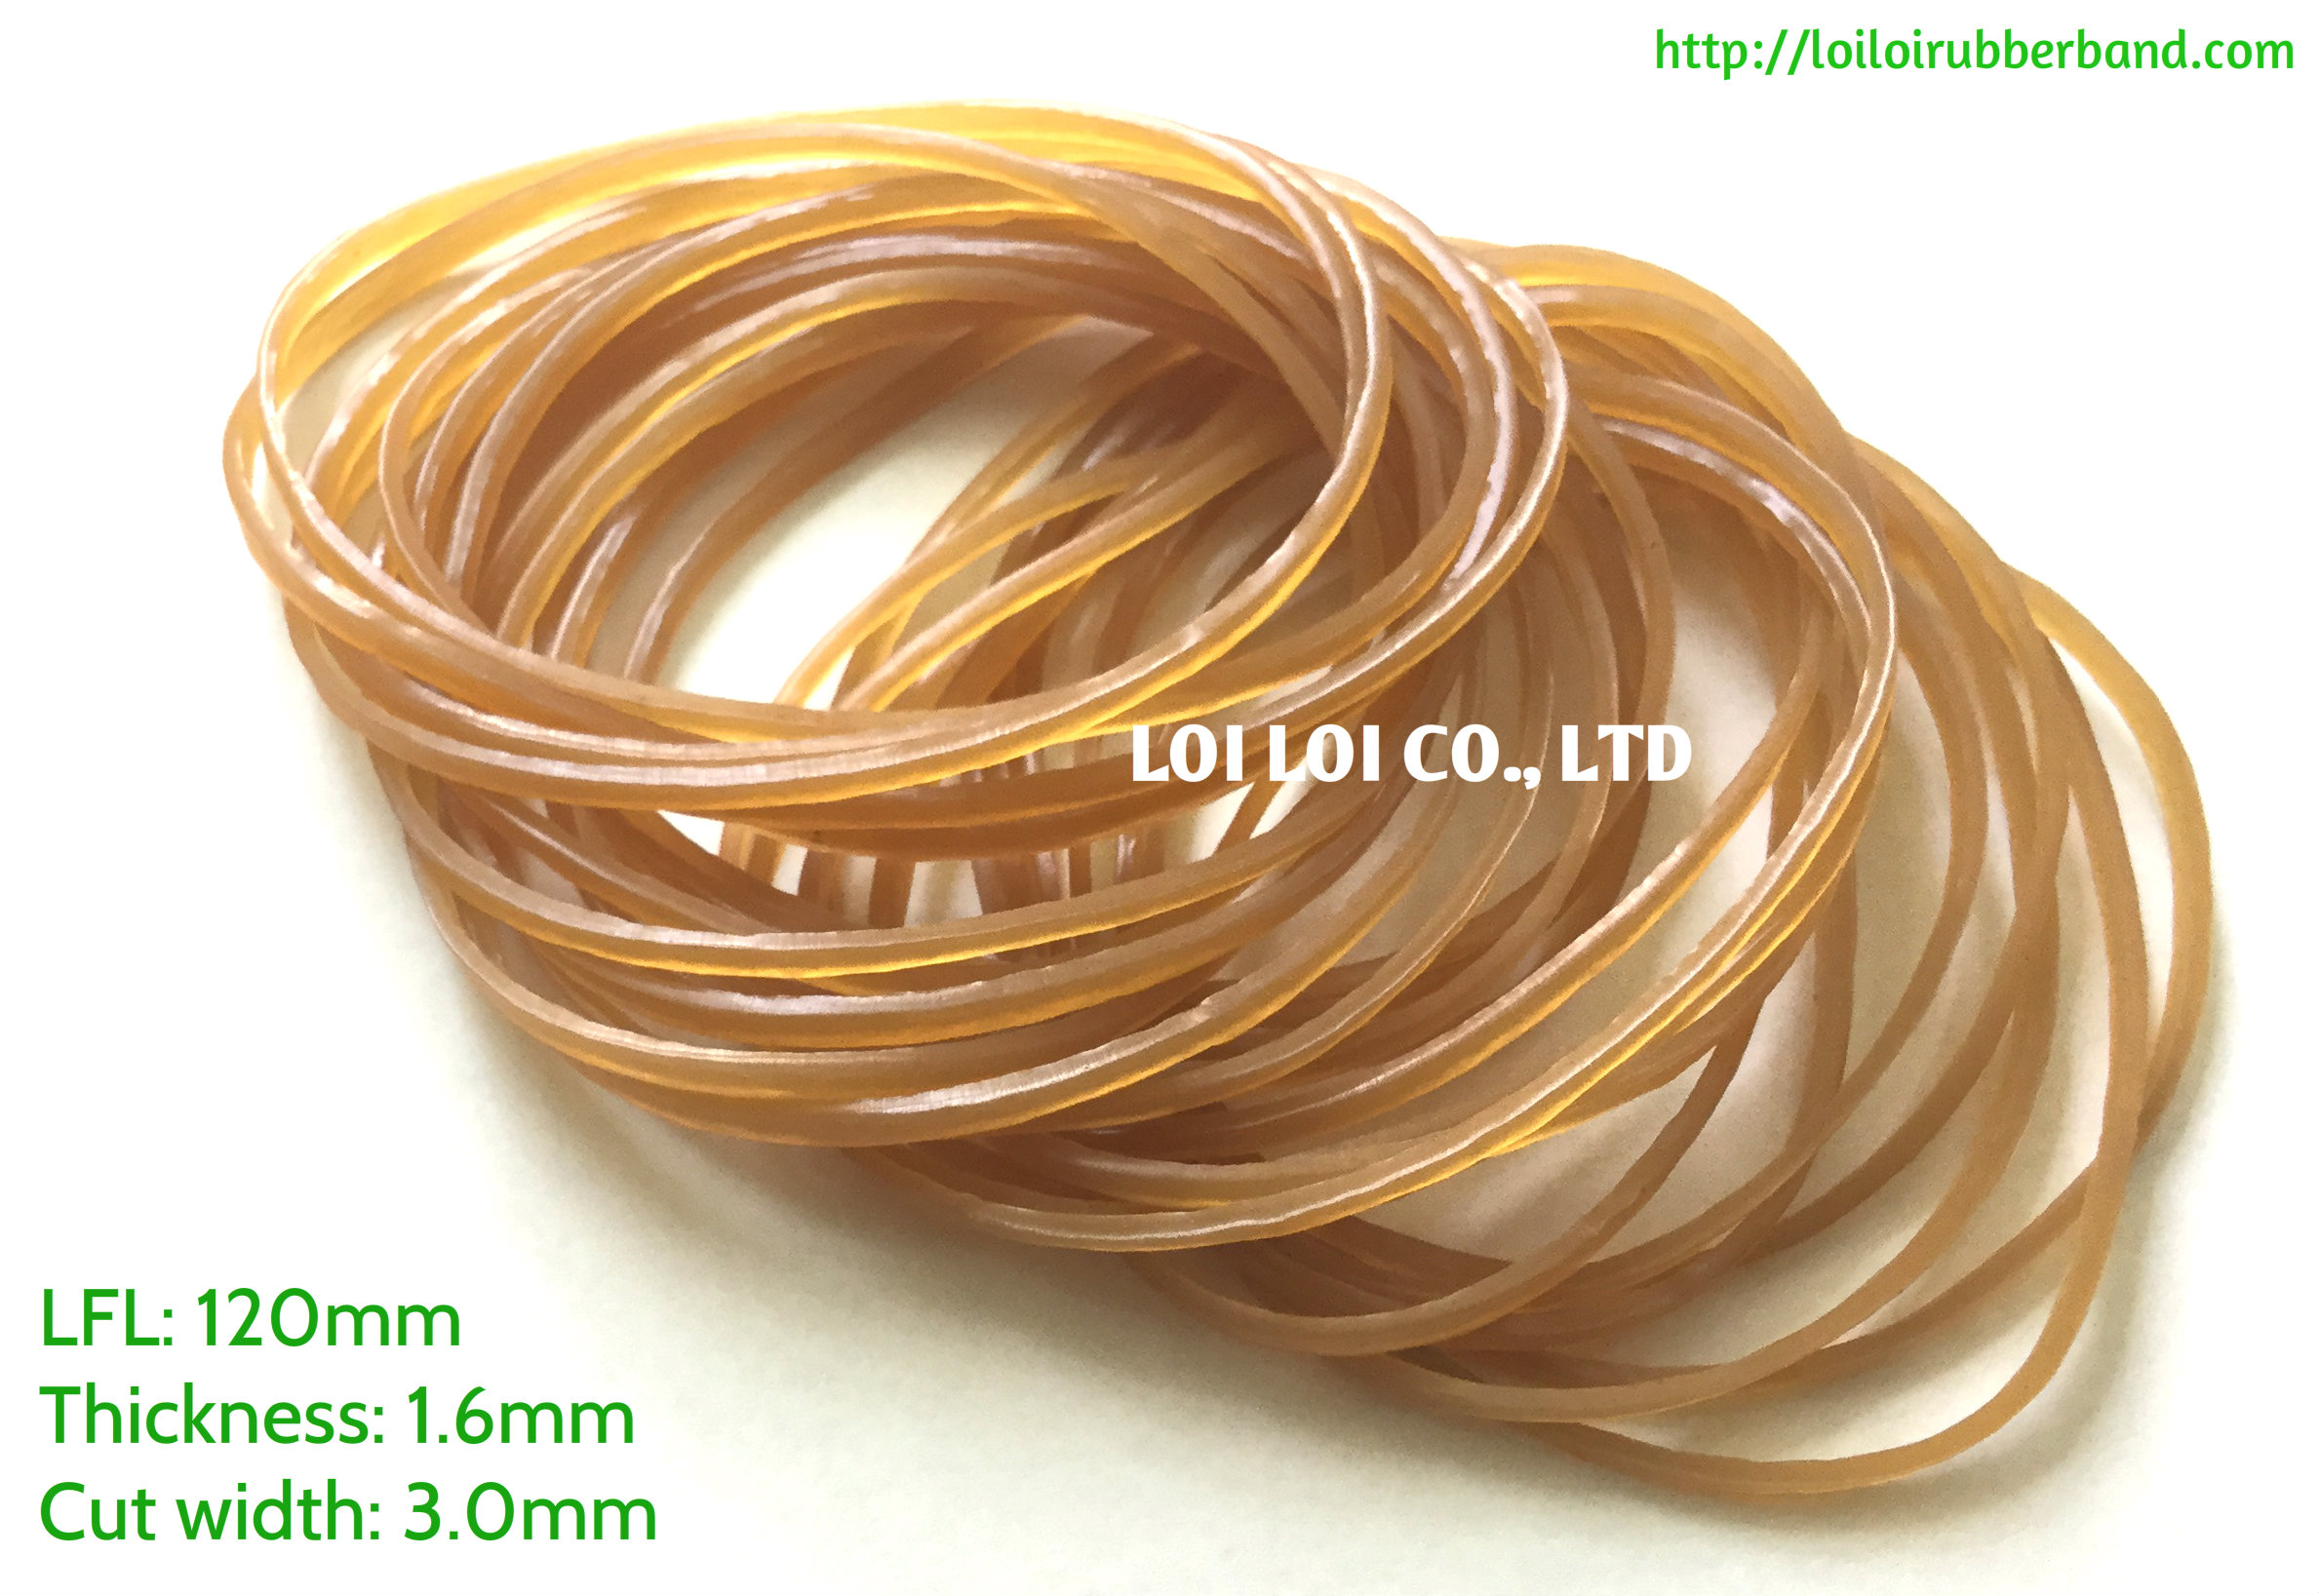 Factory directly sells thick rubber band